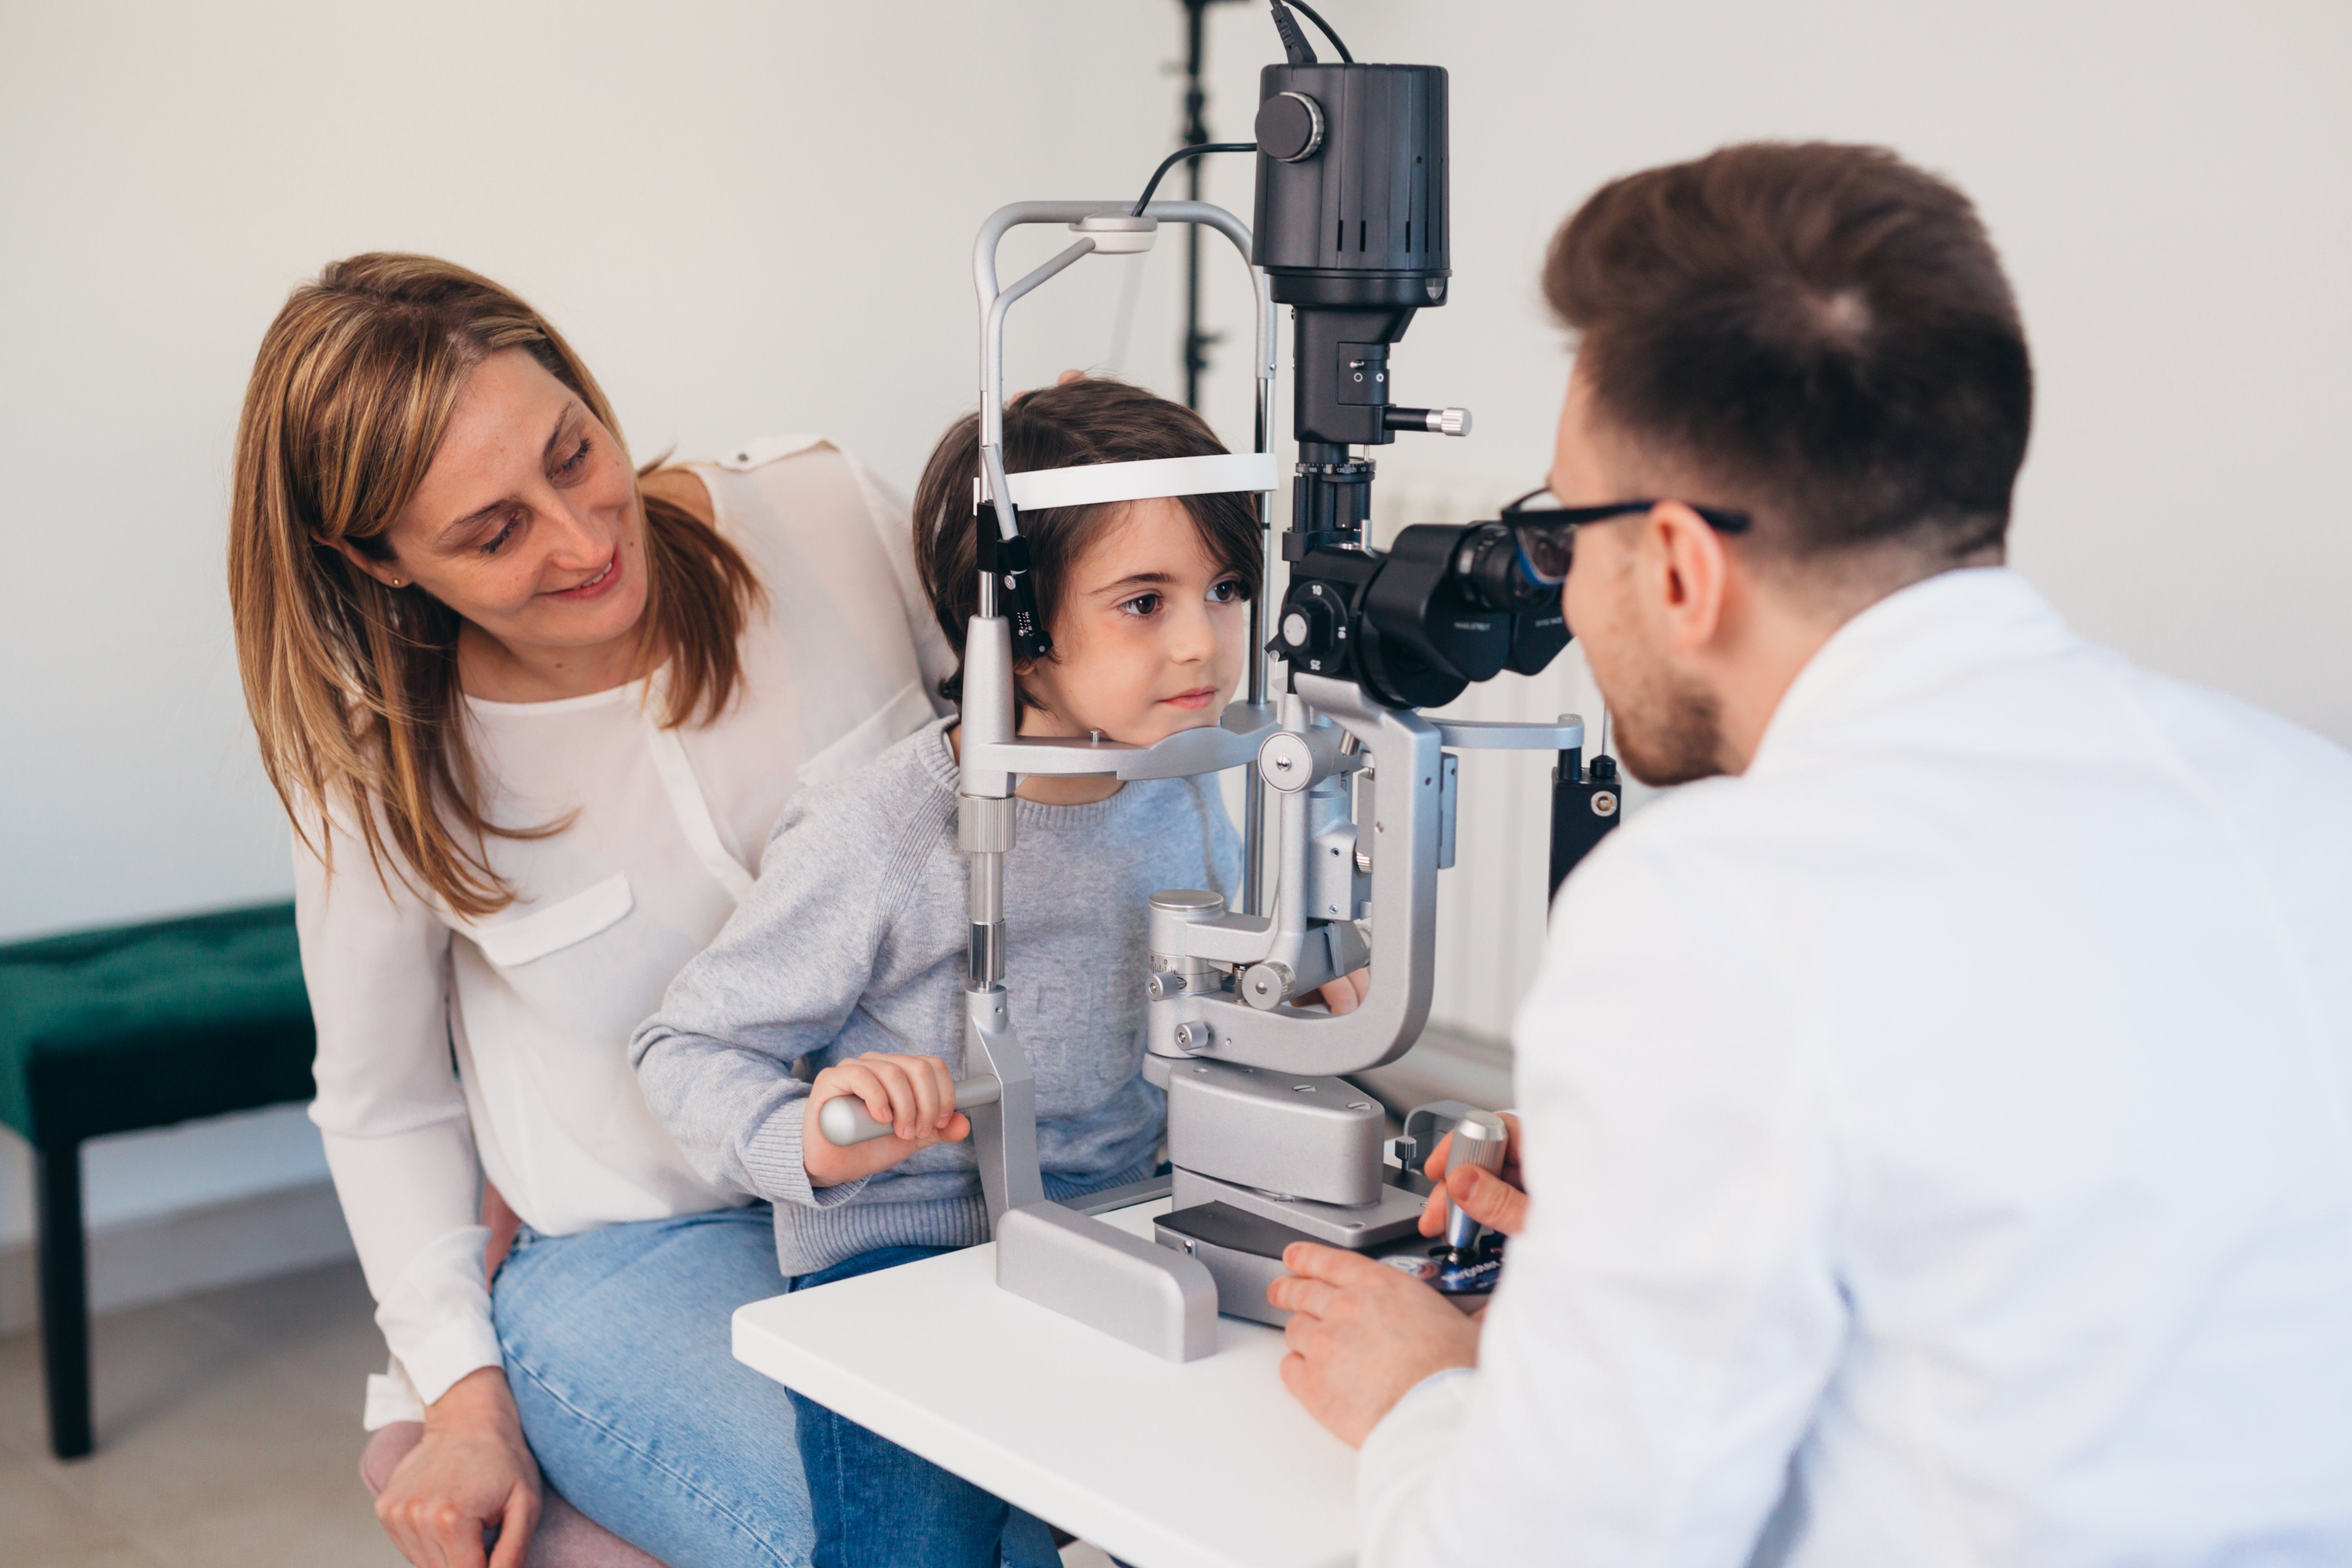 7 Ways to Prepare Your Child for an Eye Exam